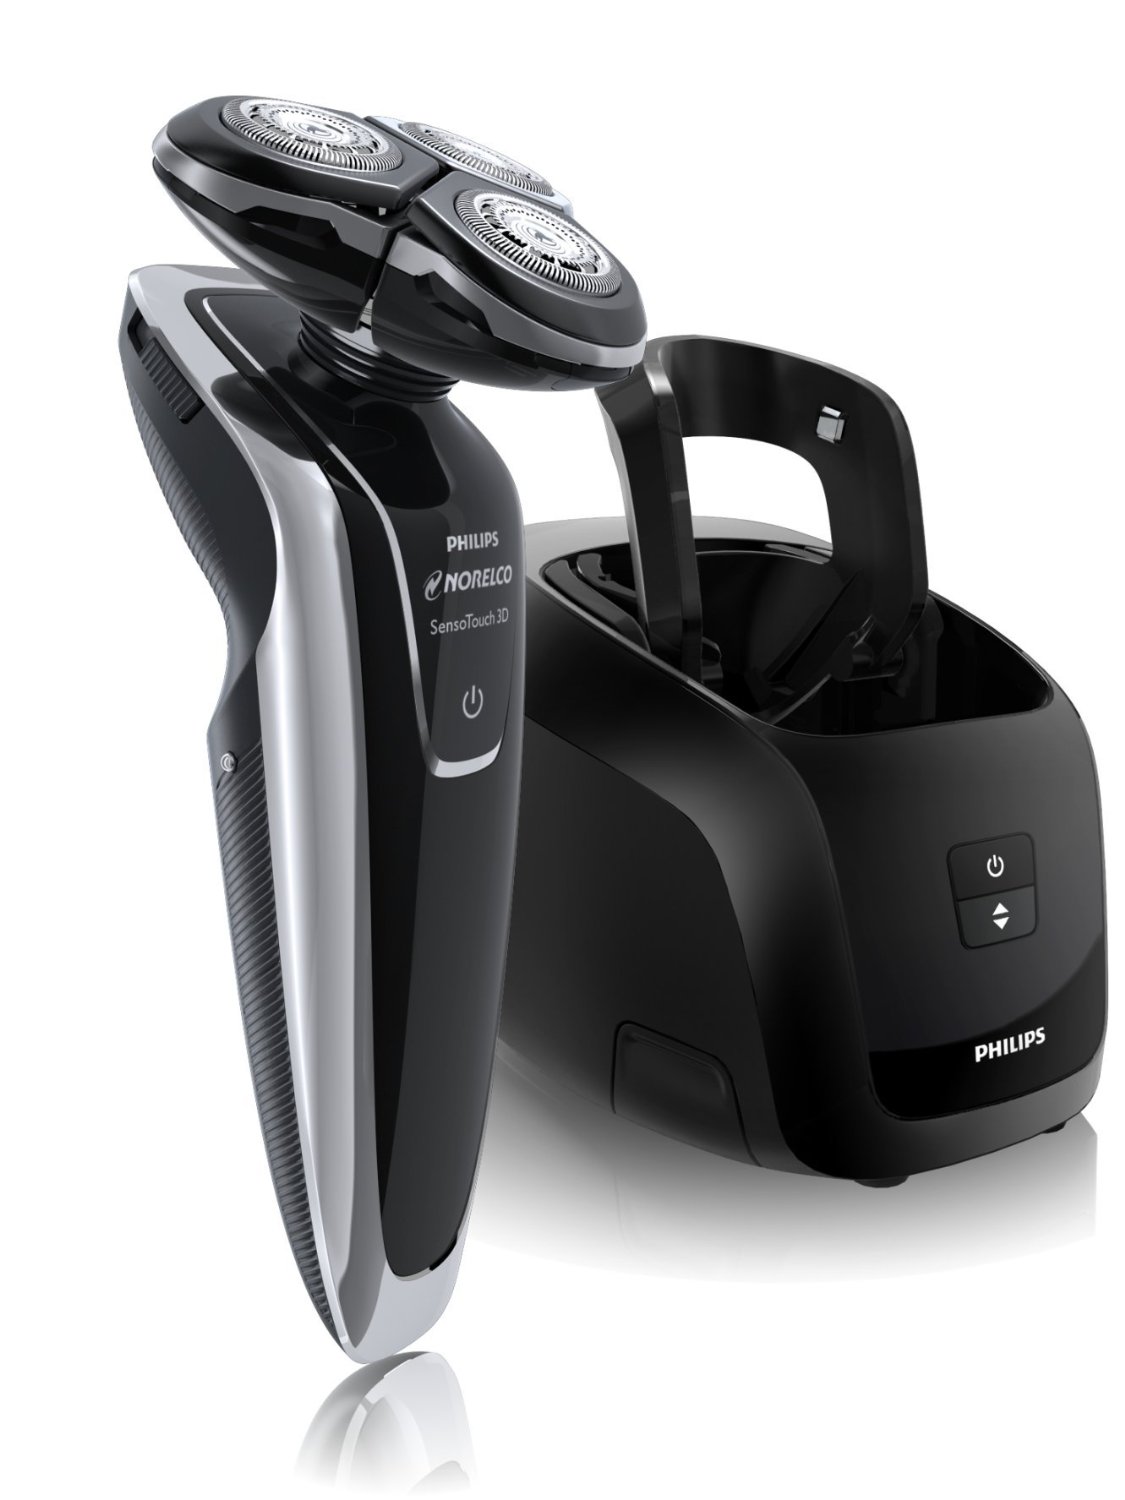 Philips Norelco Shaver 8900 (Model 1280X/42)